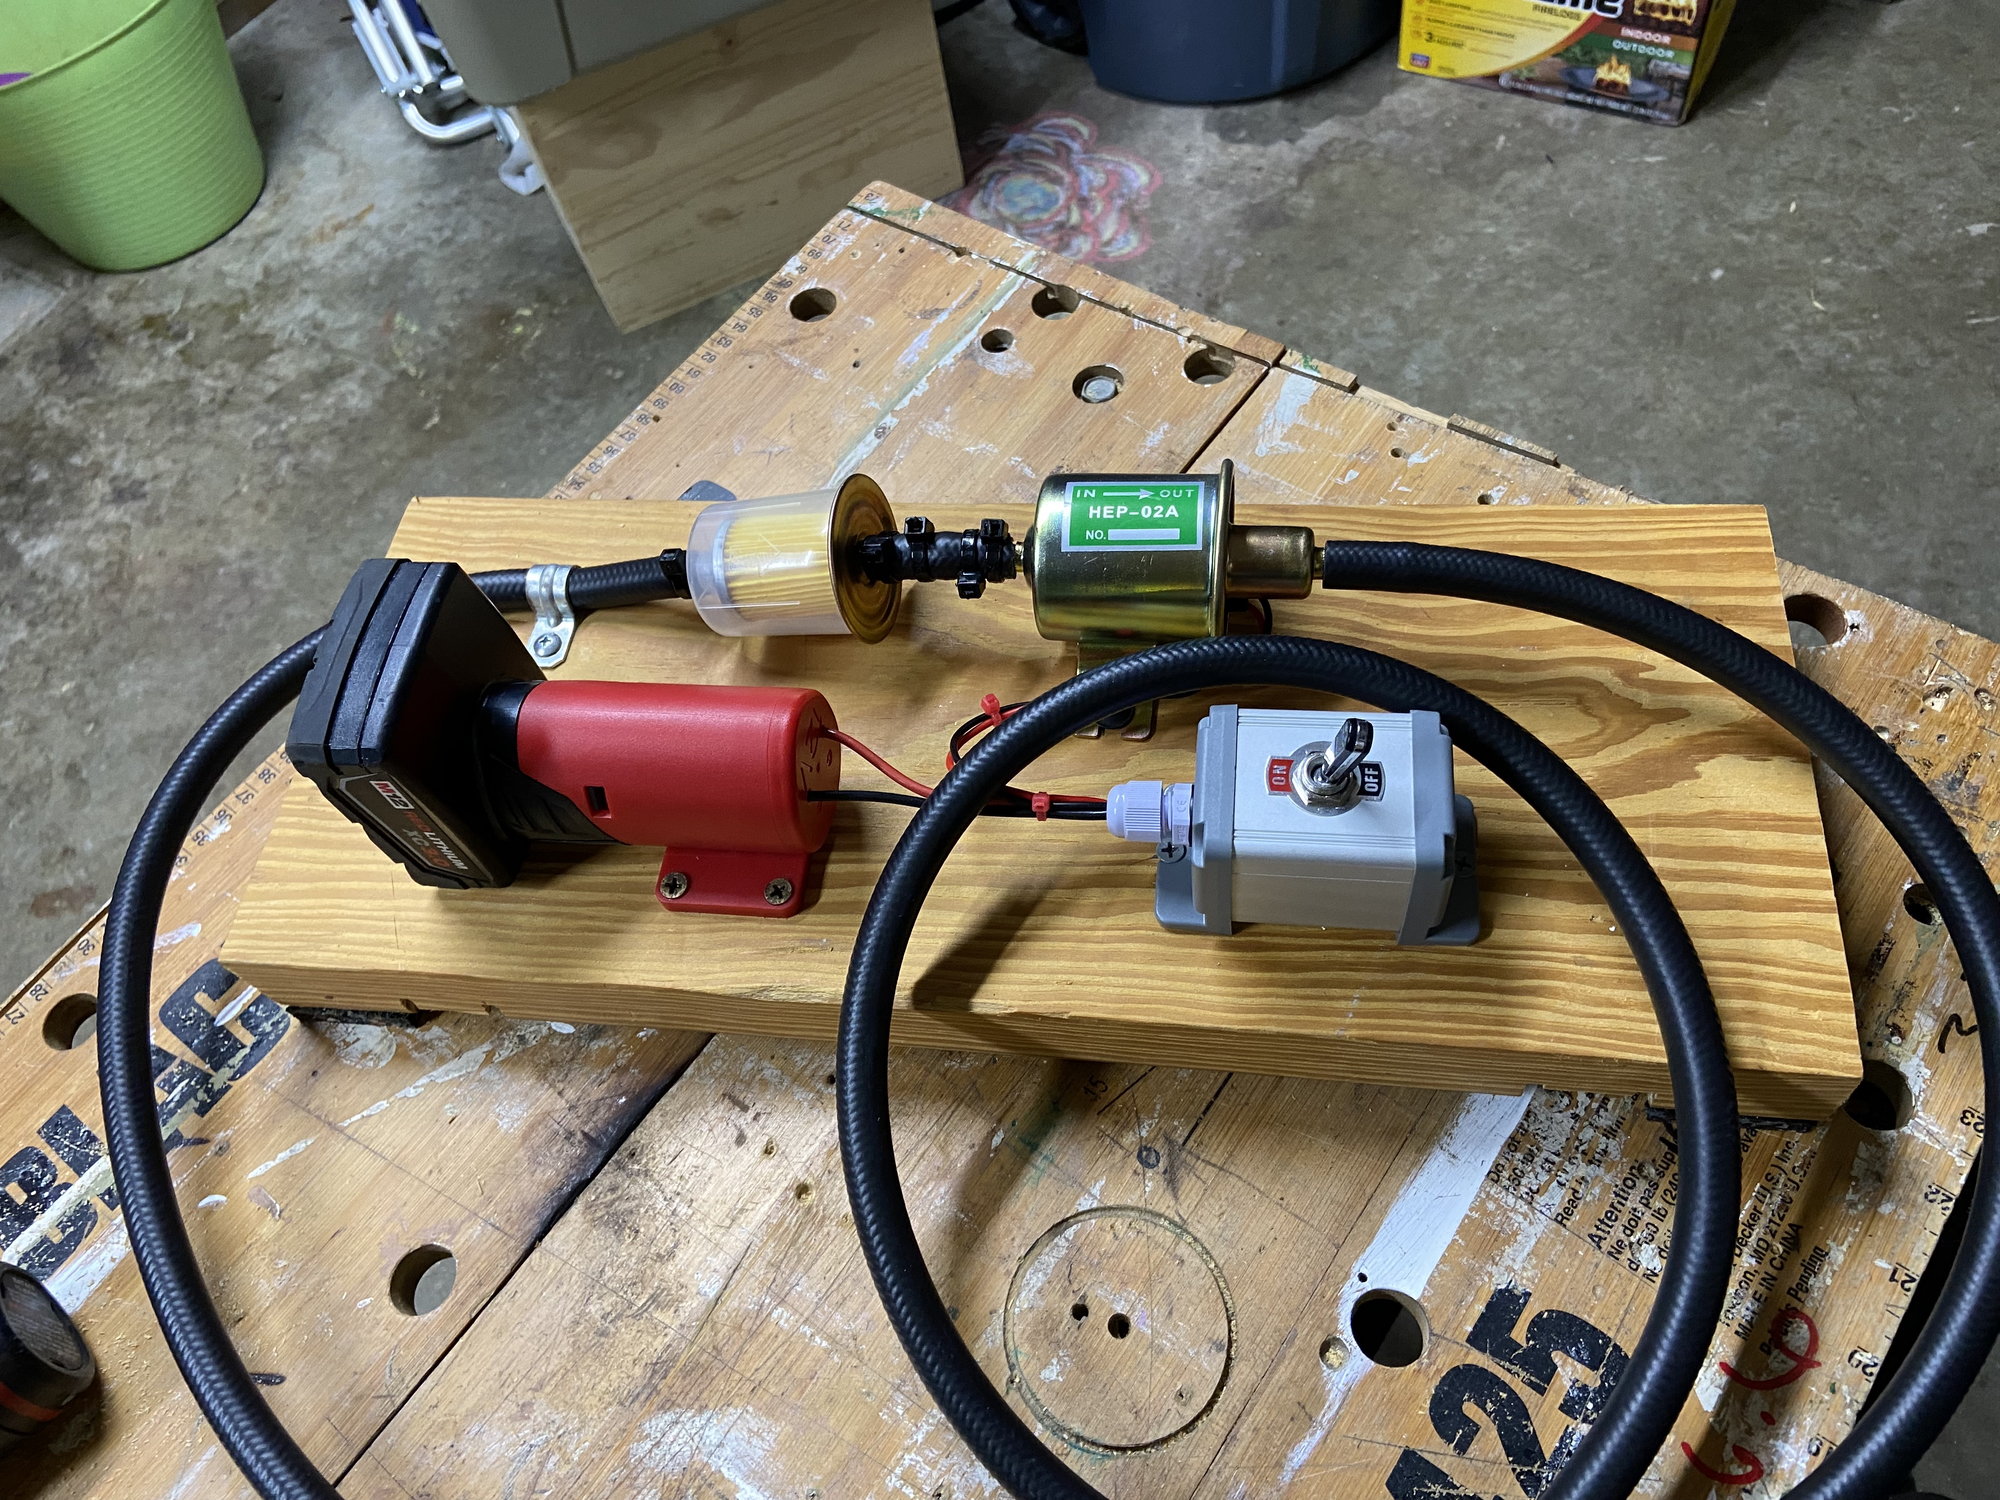 DIY fuel tank pump out kit - The Hull Truth - Boating and Fishing Forum